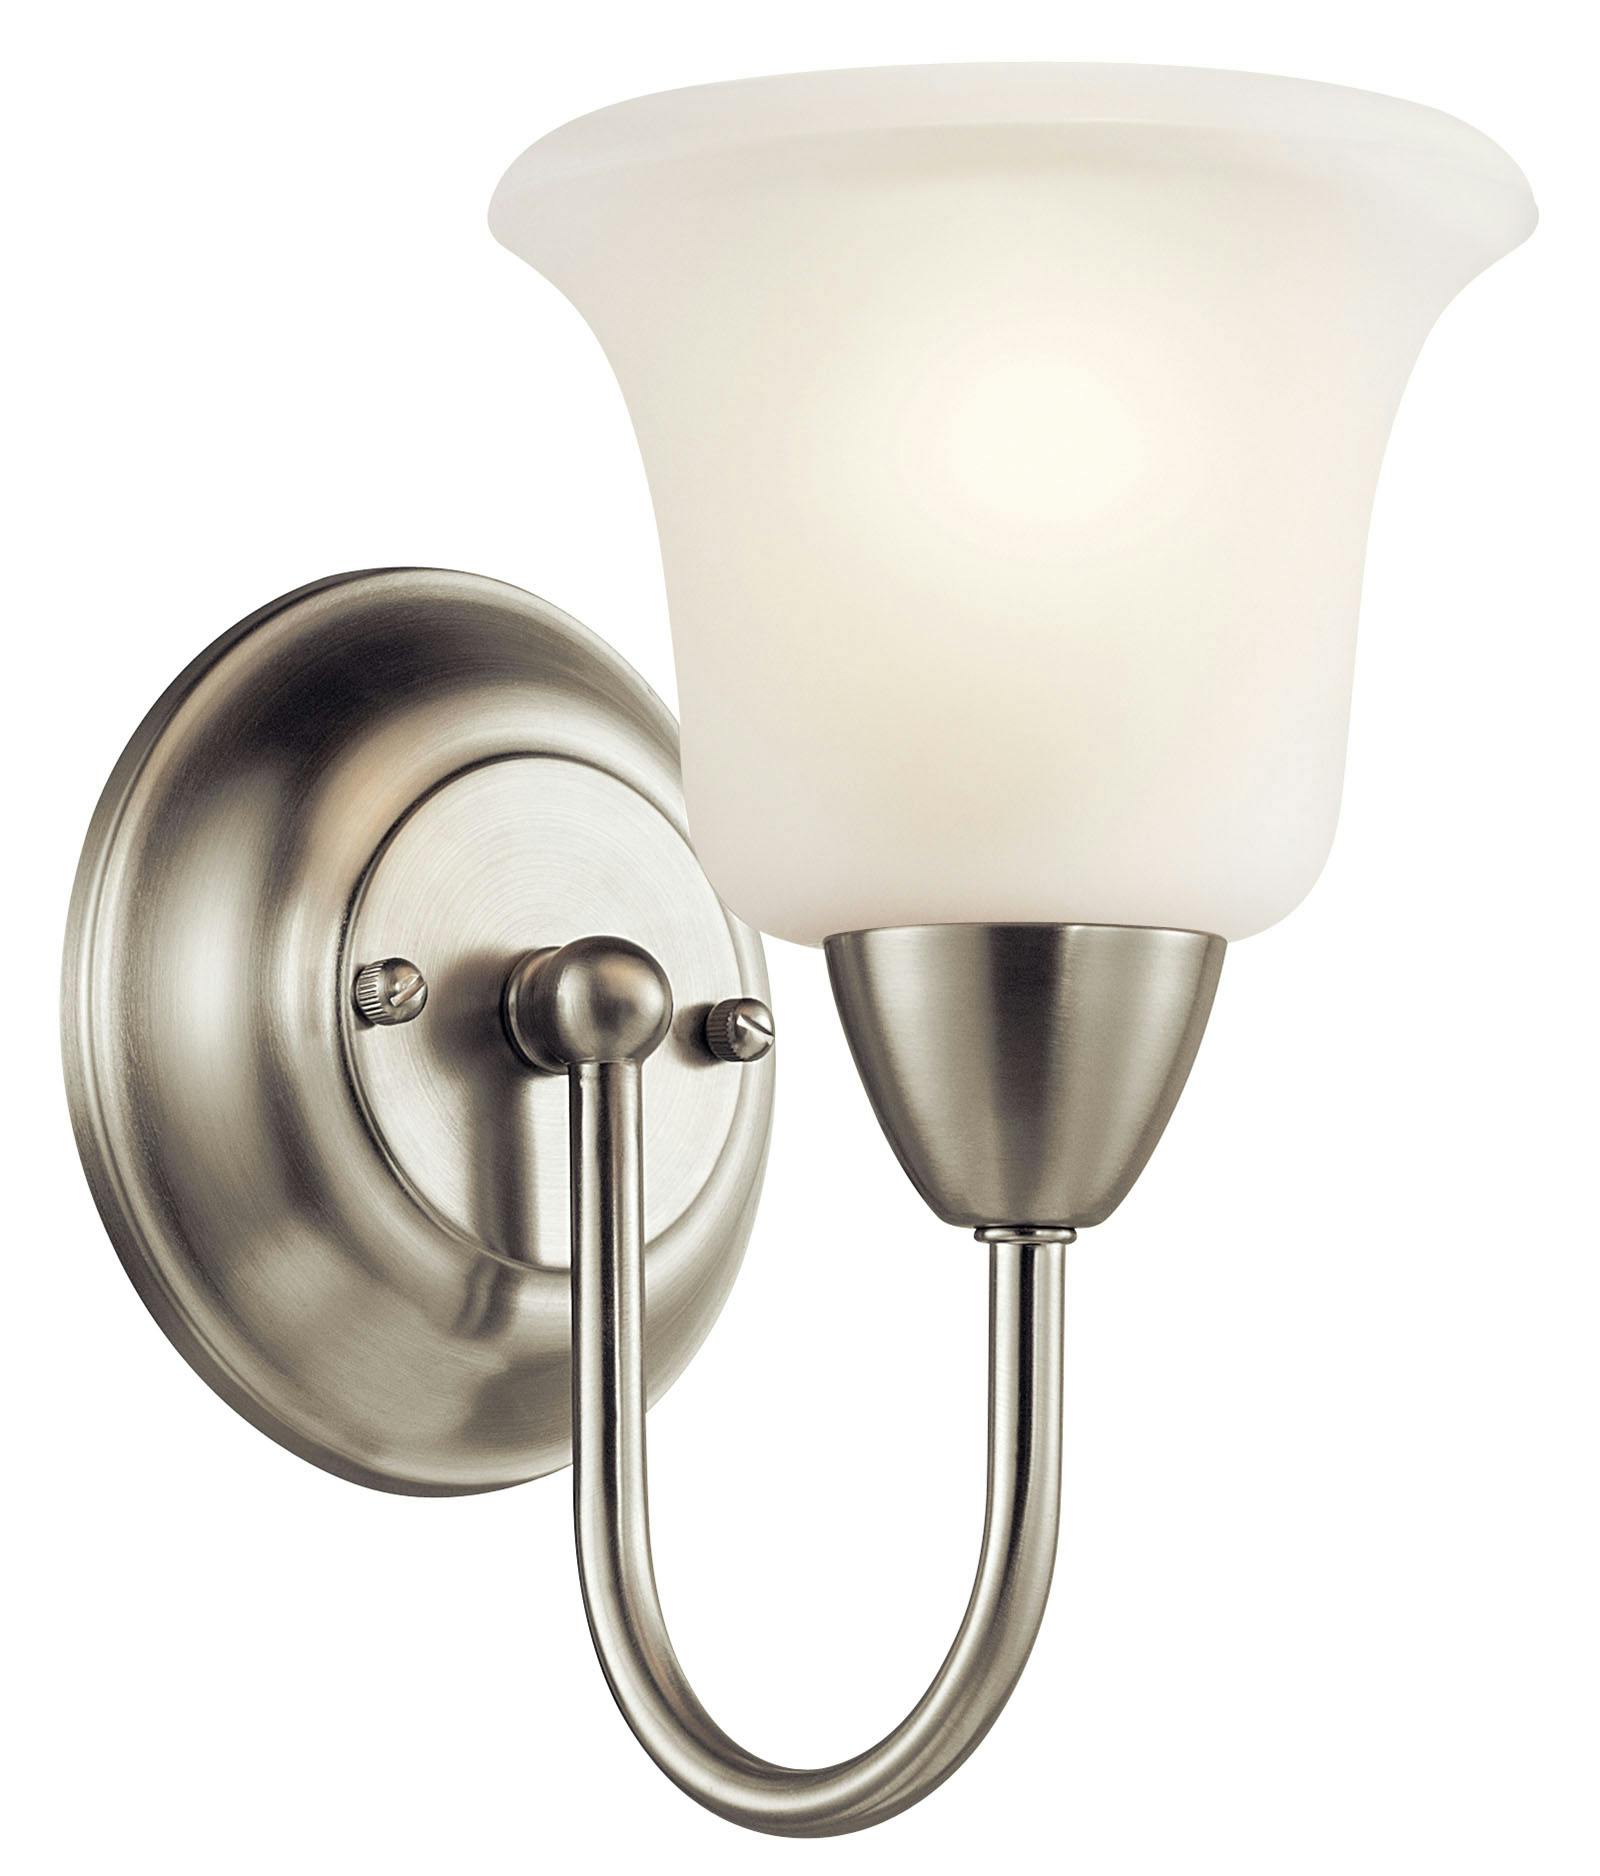 Nicholson 1 Light Sconce Brushed Nickel on a white background